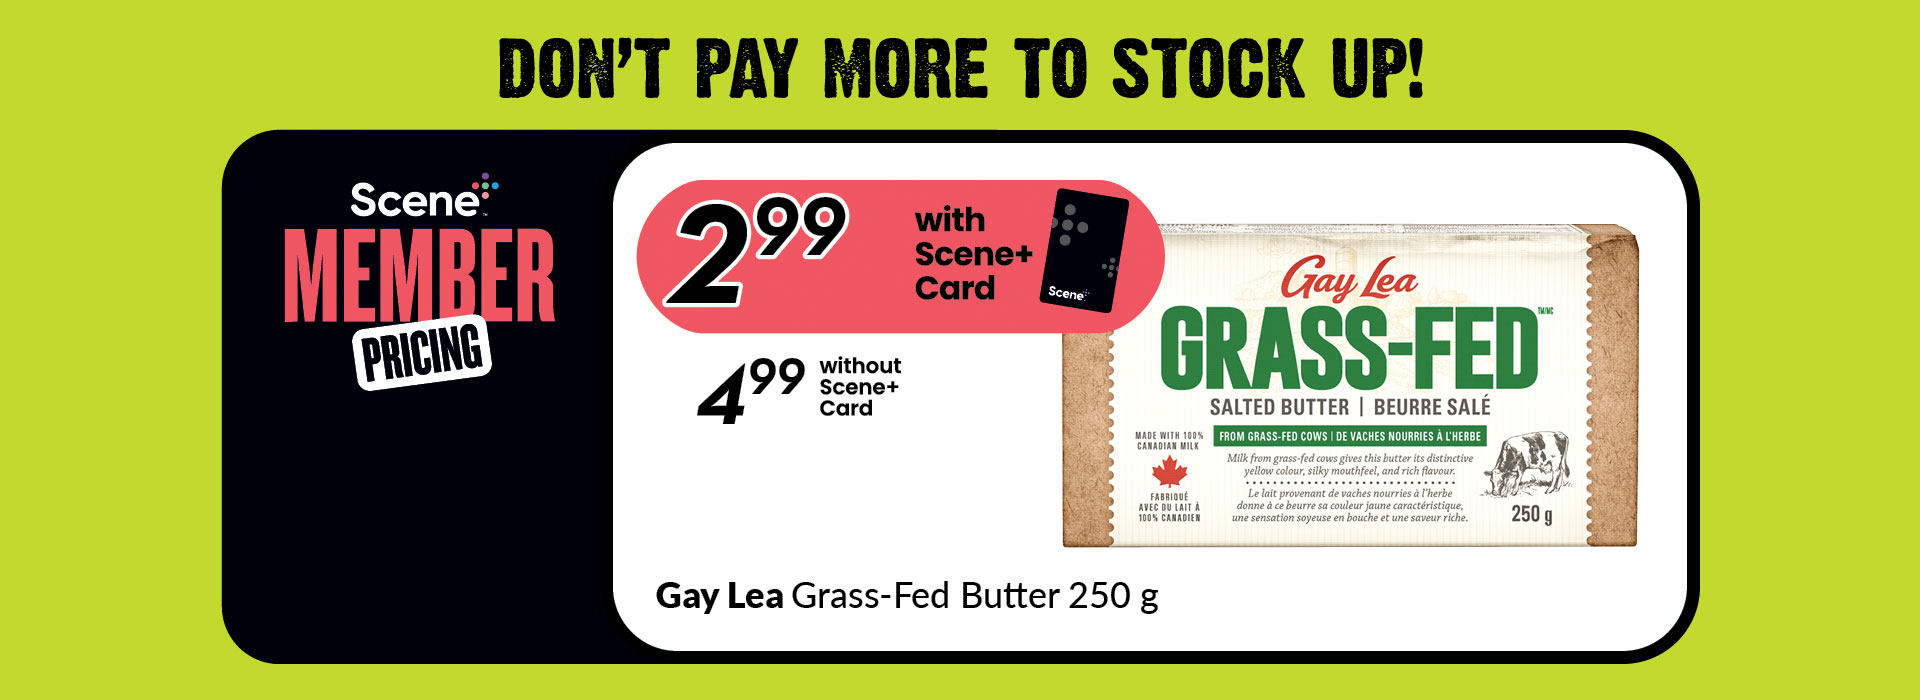 Text Reading ‘Don’t Pay More To Stock Up. Scene Plus Member Pricing. Buy Gay Lea Grass-fed butter 250 g at $2.99 with scene plus card and $4.99 without scene plus card.’